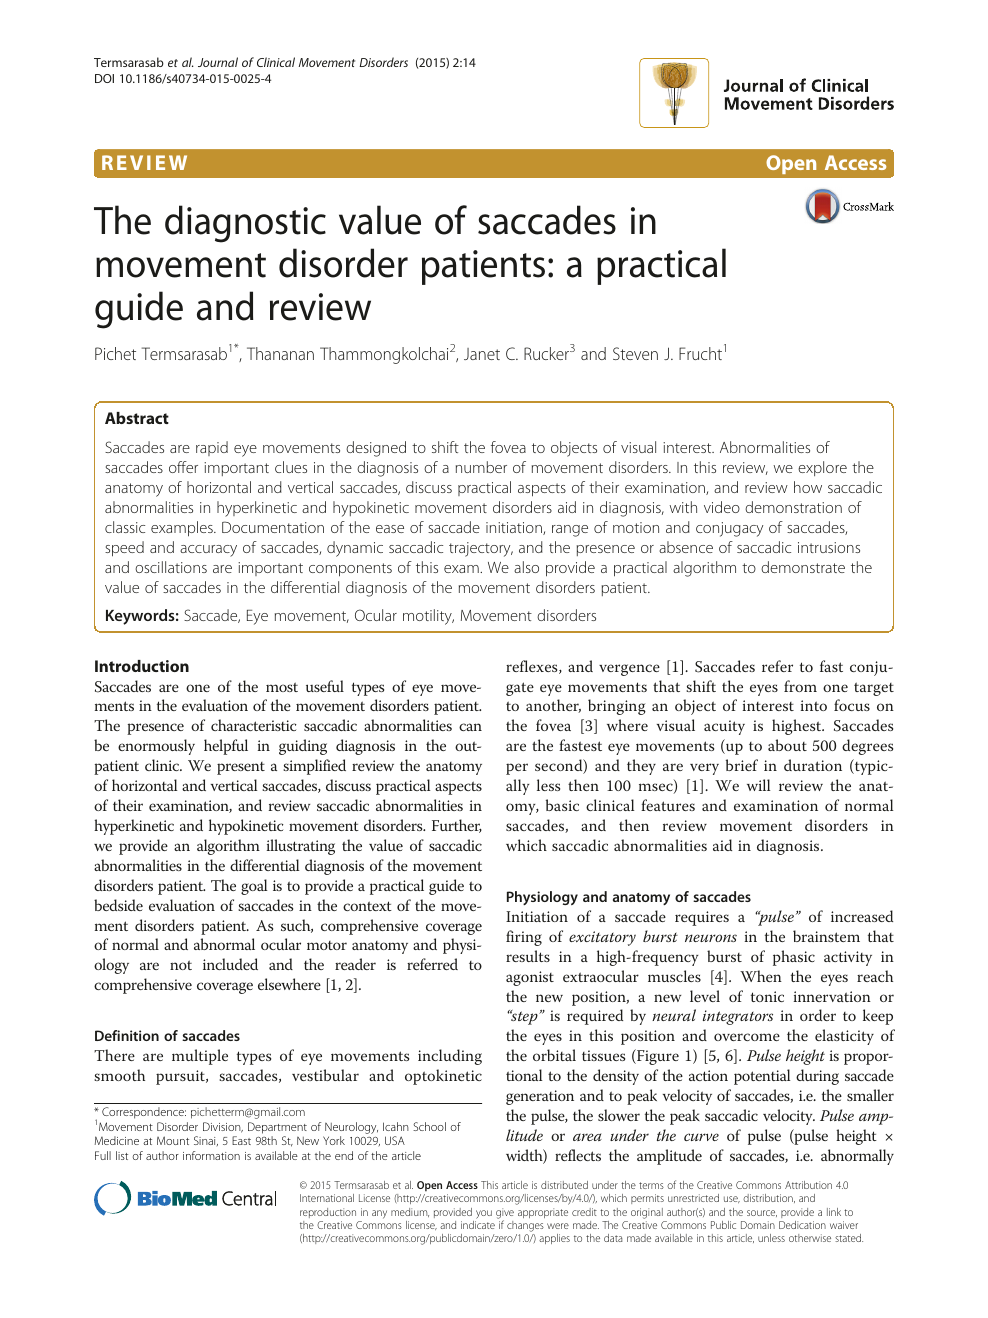 The Diagnostic Value Of Saccades In Movement Disorder Patients A Practical Guide And Review Topic Of Research Paper In Clinical Medicine Download Scholarly Article Pdf And Read For Free On Cyberleninka